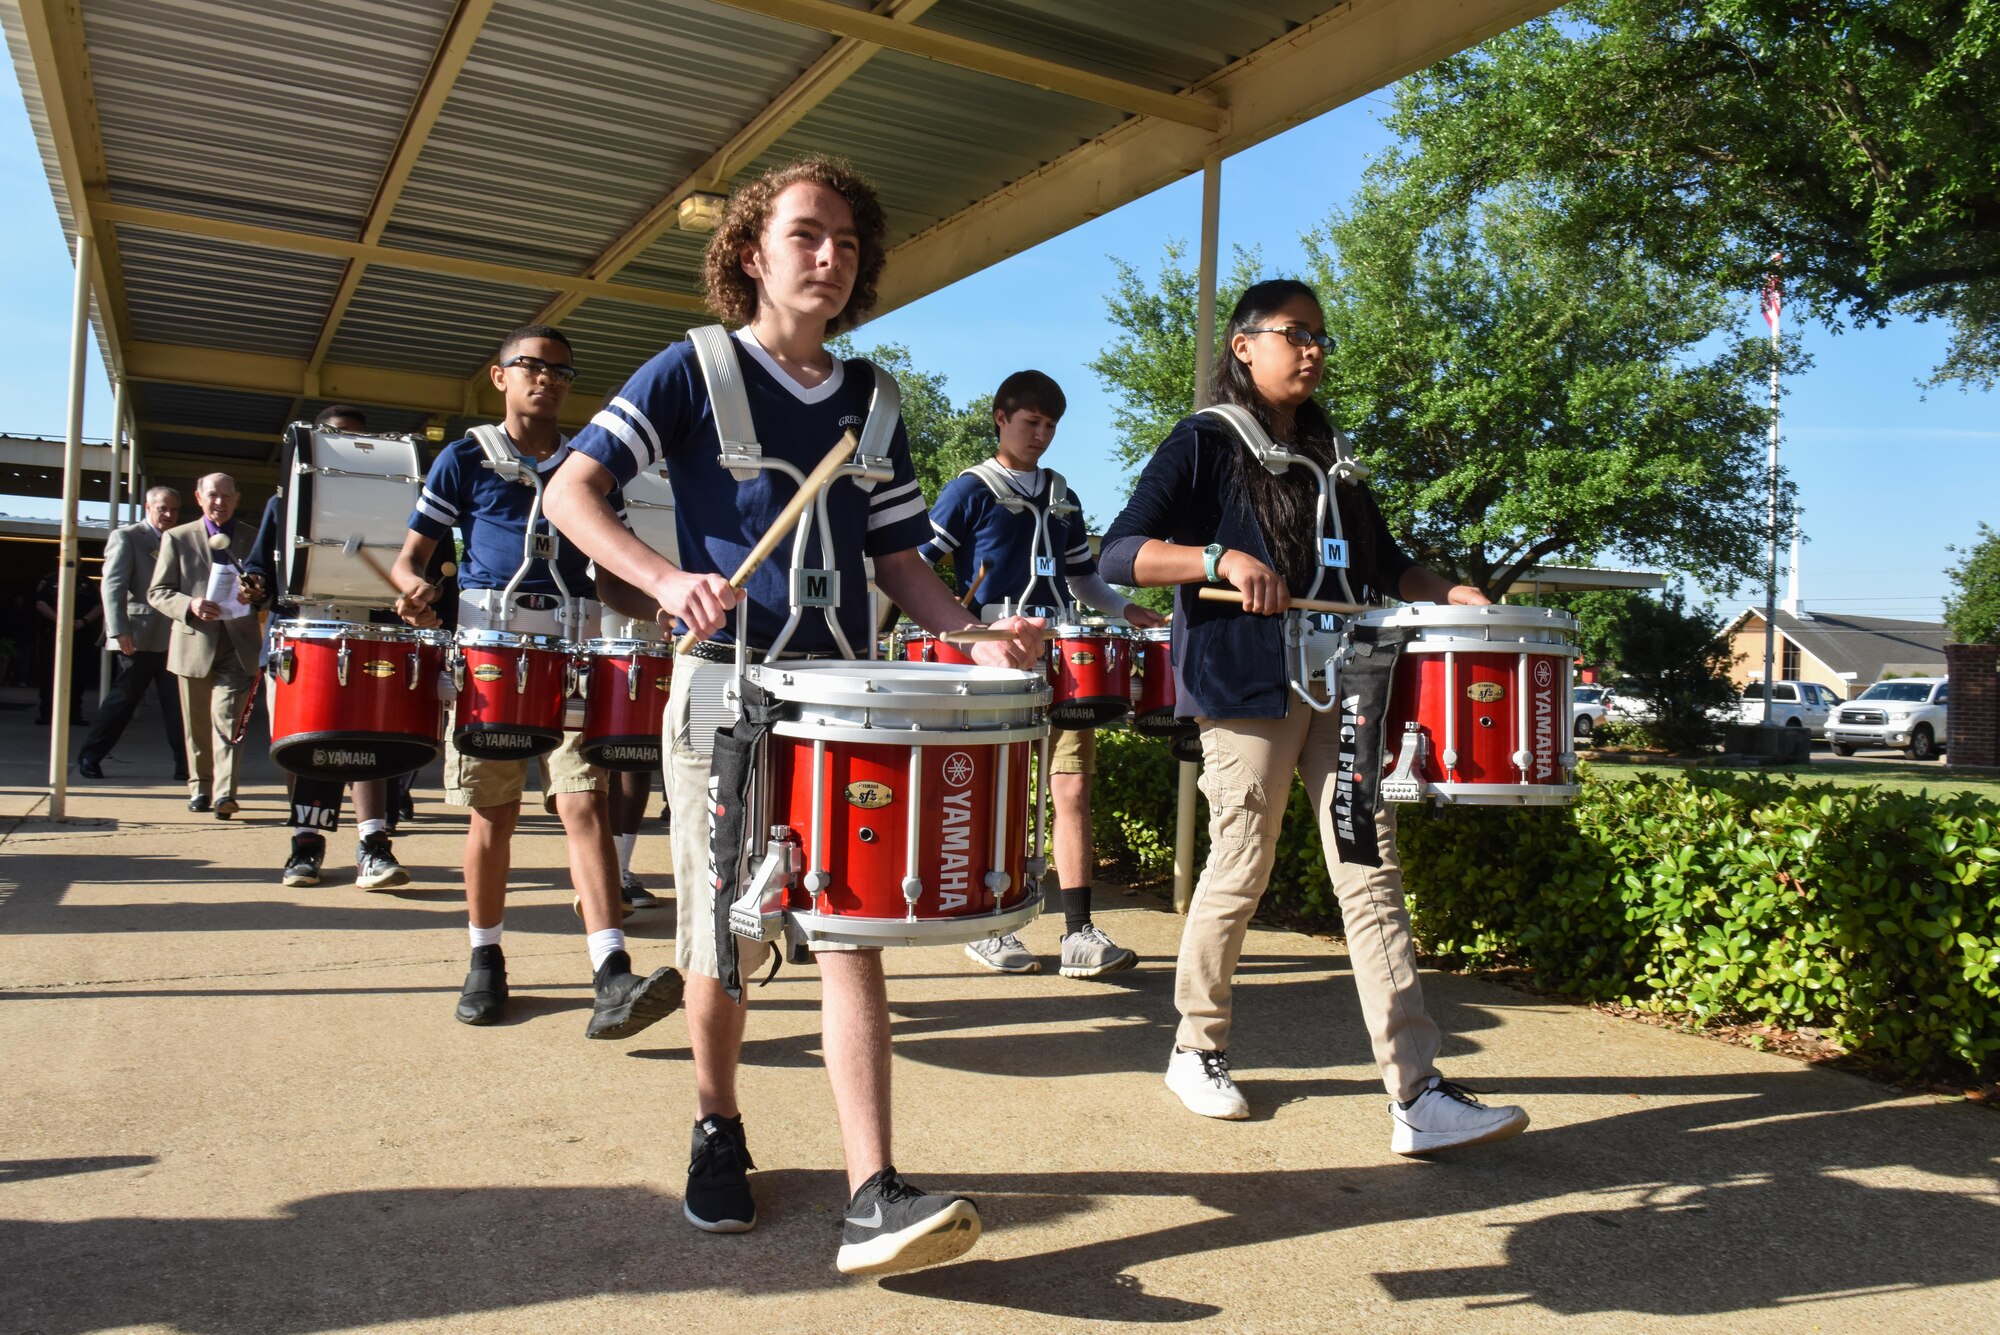 The Green Acres Middle School drumline leads military children in a parade during Purple-Up Day in Bossier City, La., April 7, 2017. The parade gave recognition to military children and the sacrifices they make. (U.S. Air Force photo/Senior Airman Luke Hill)